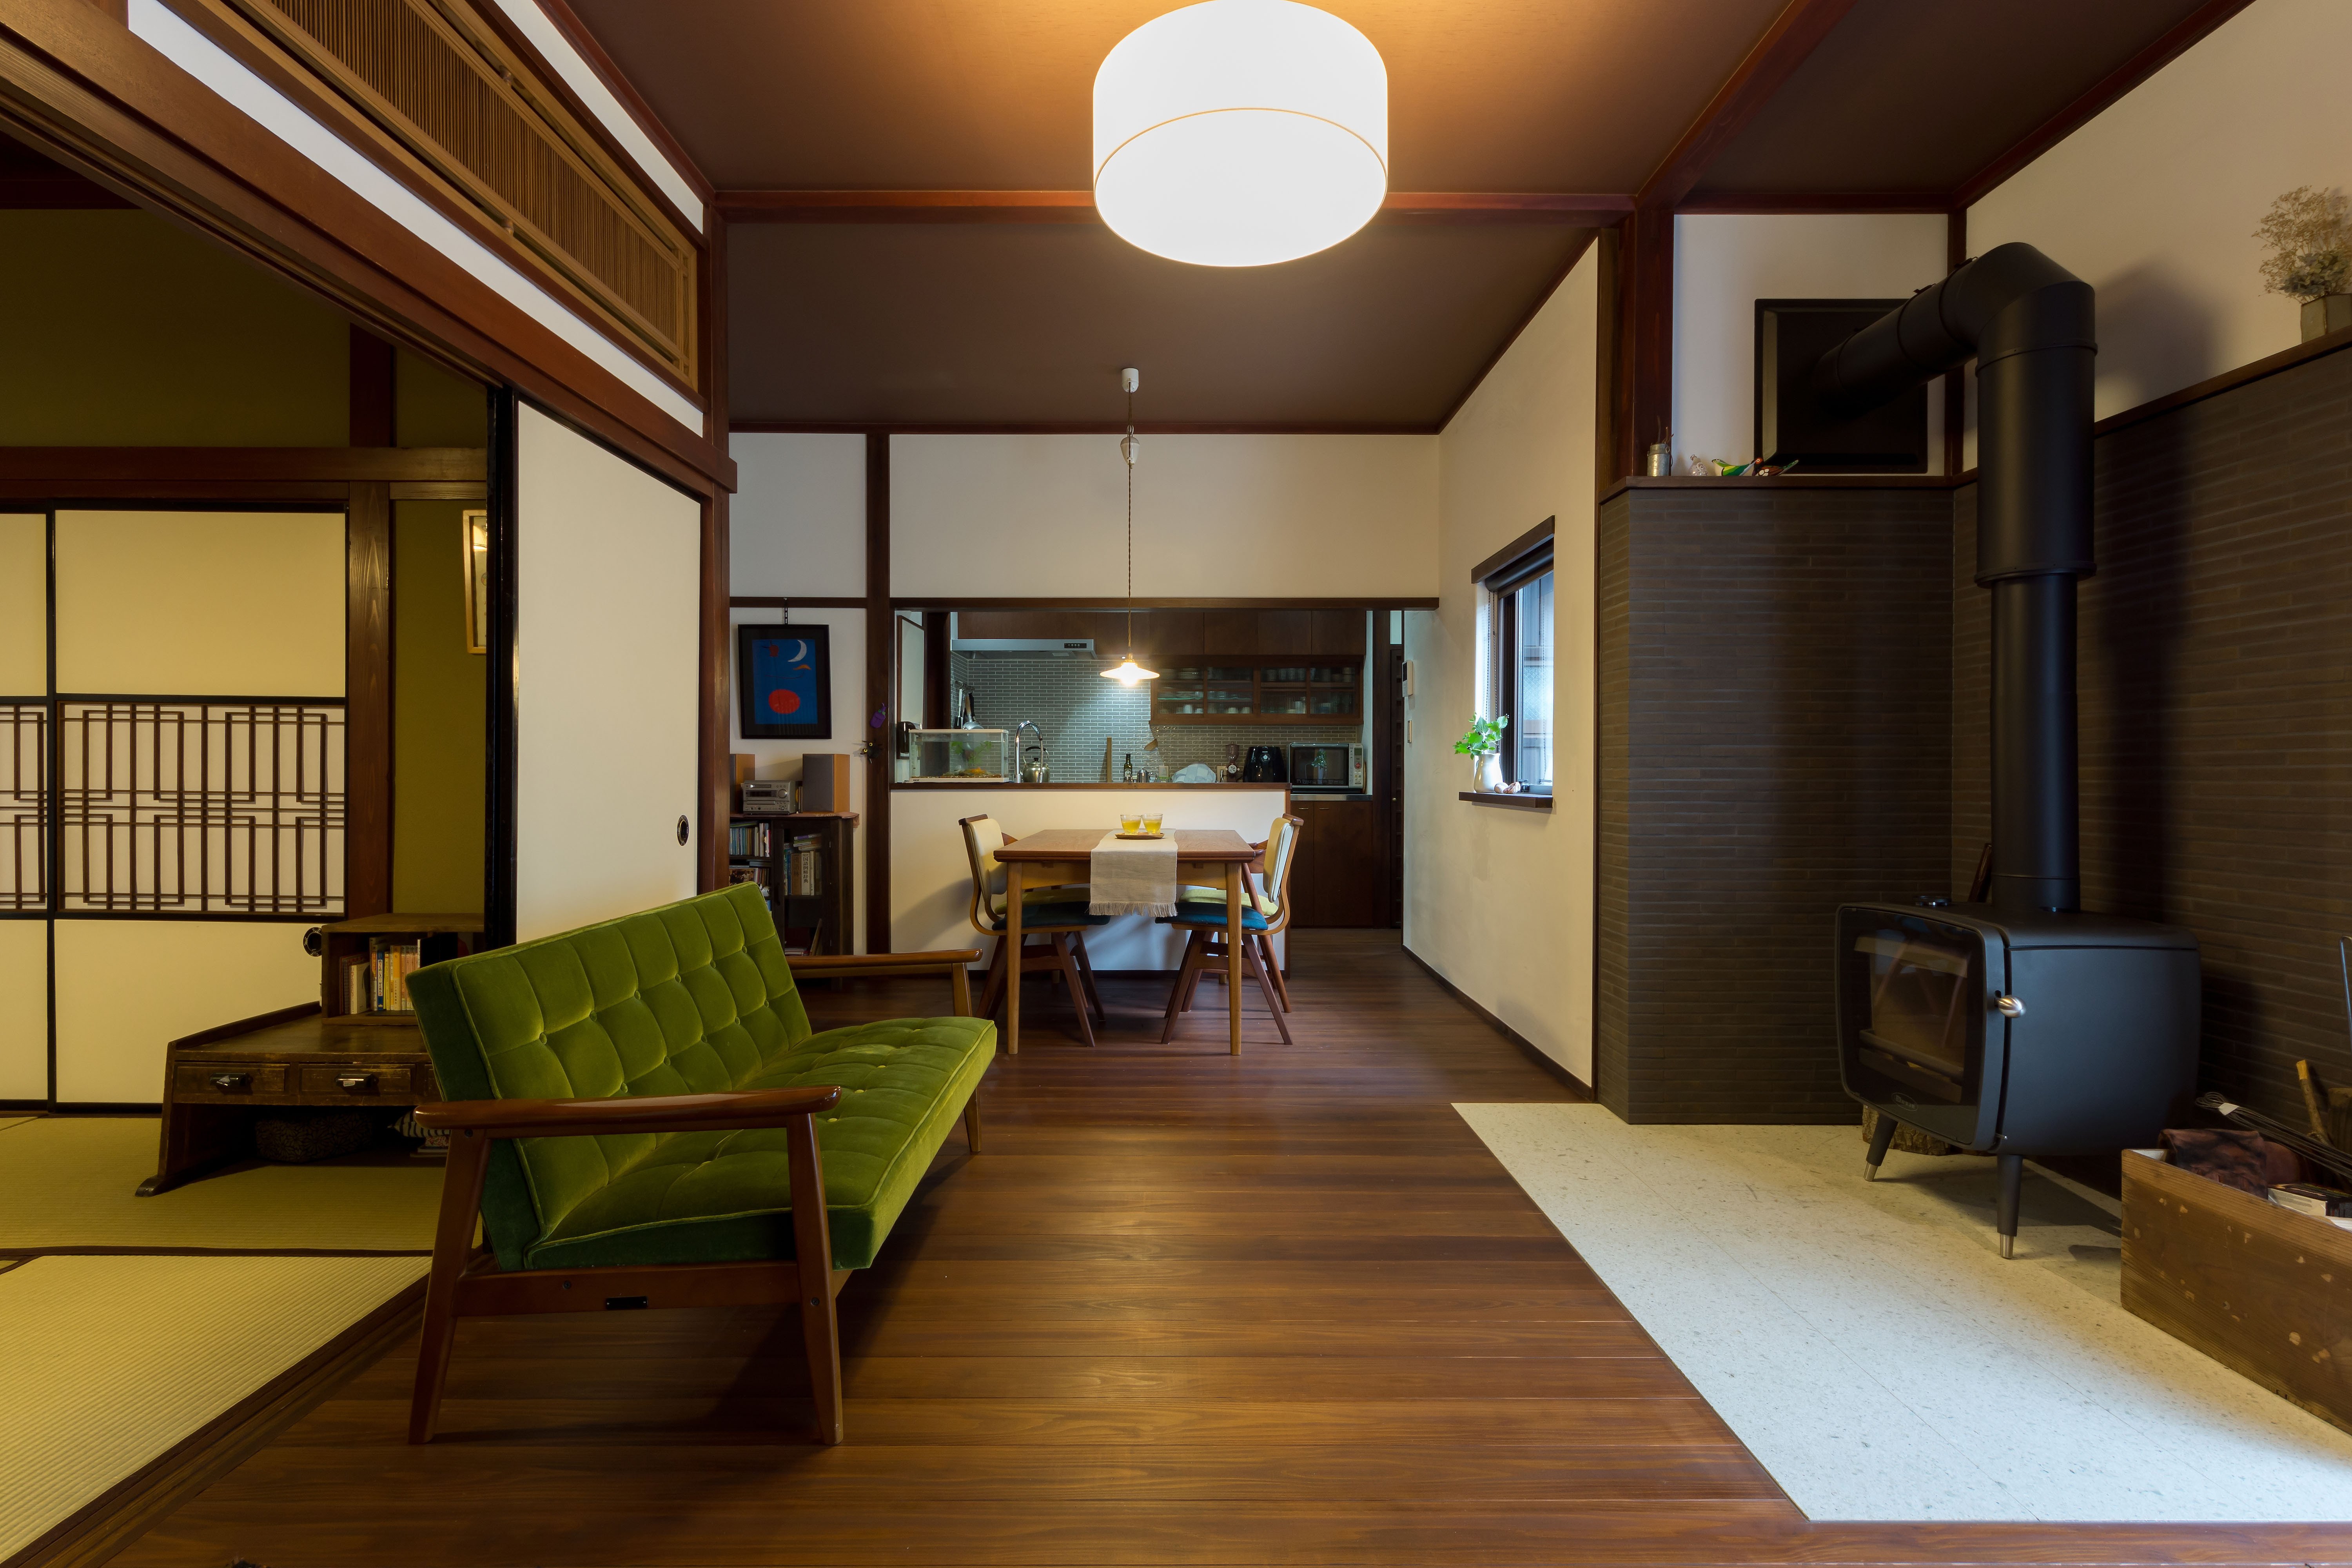 typical living room in japan